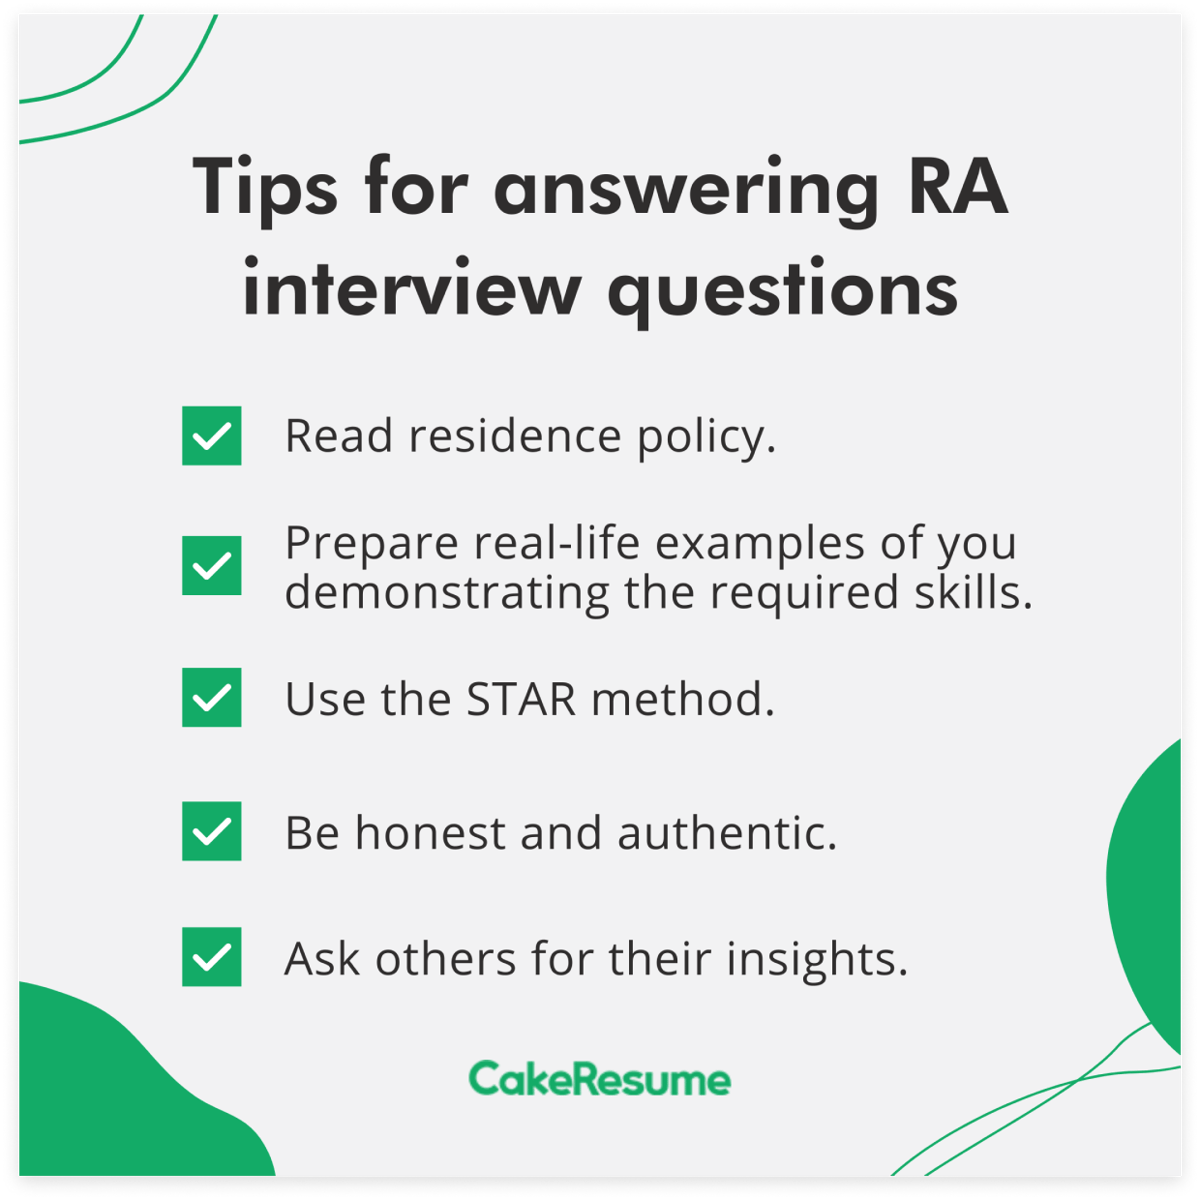 Frequent questions asked at an interview for ra